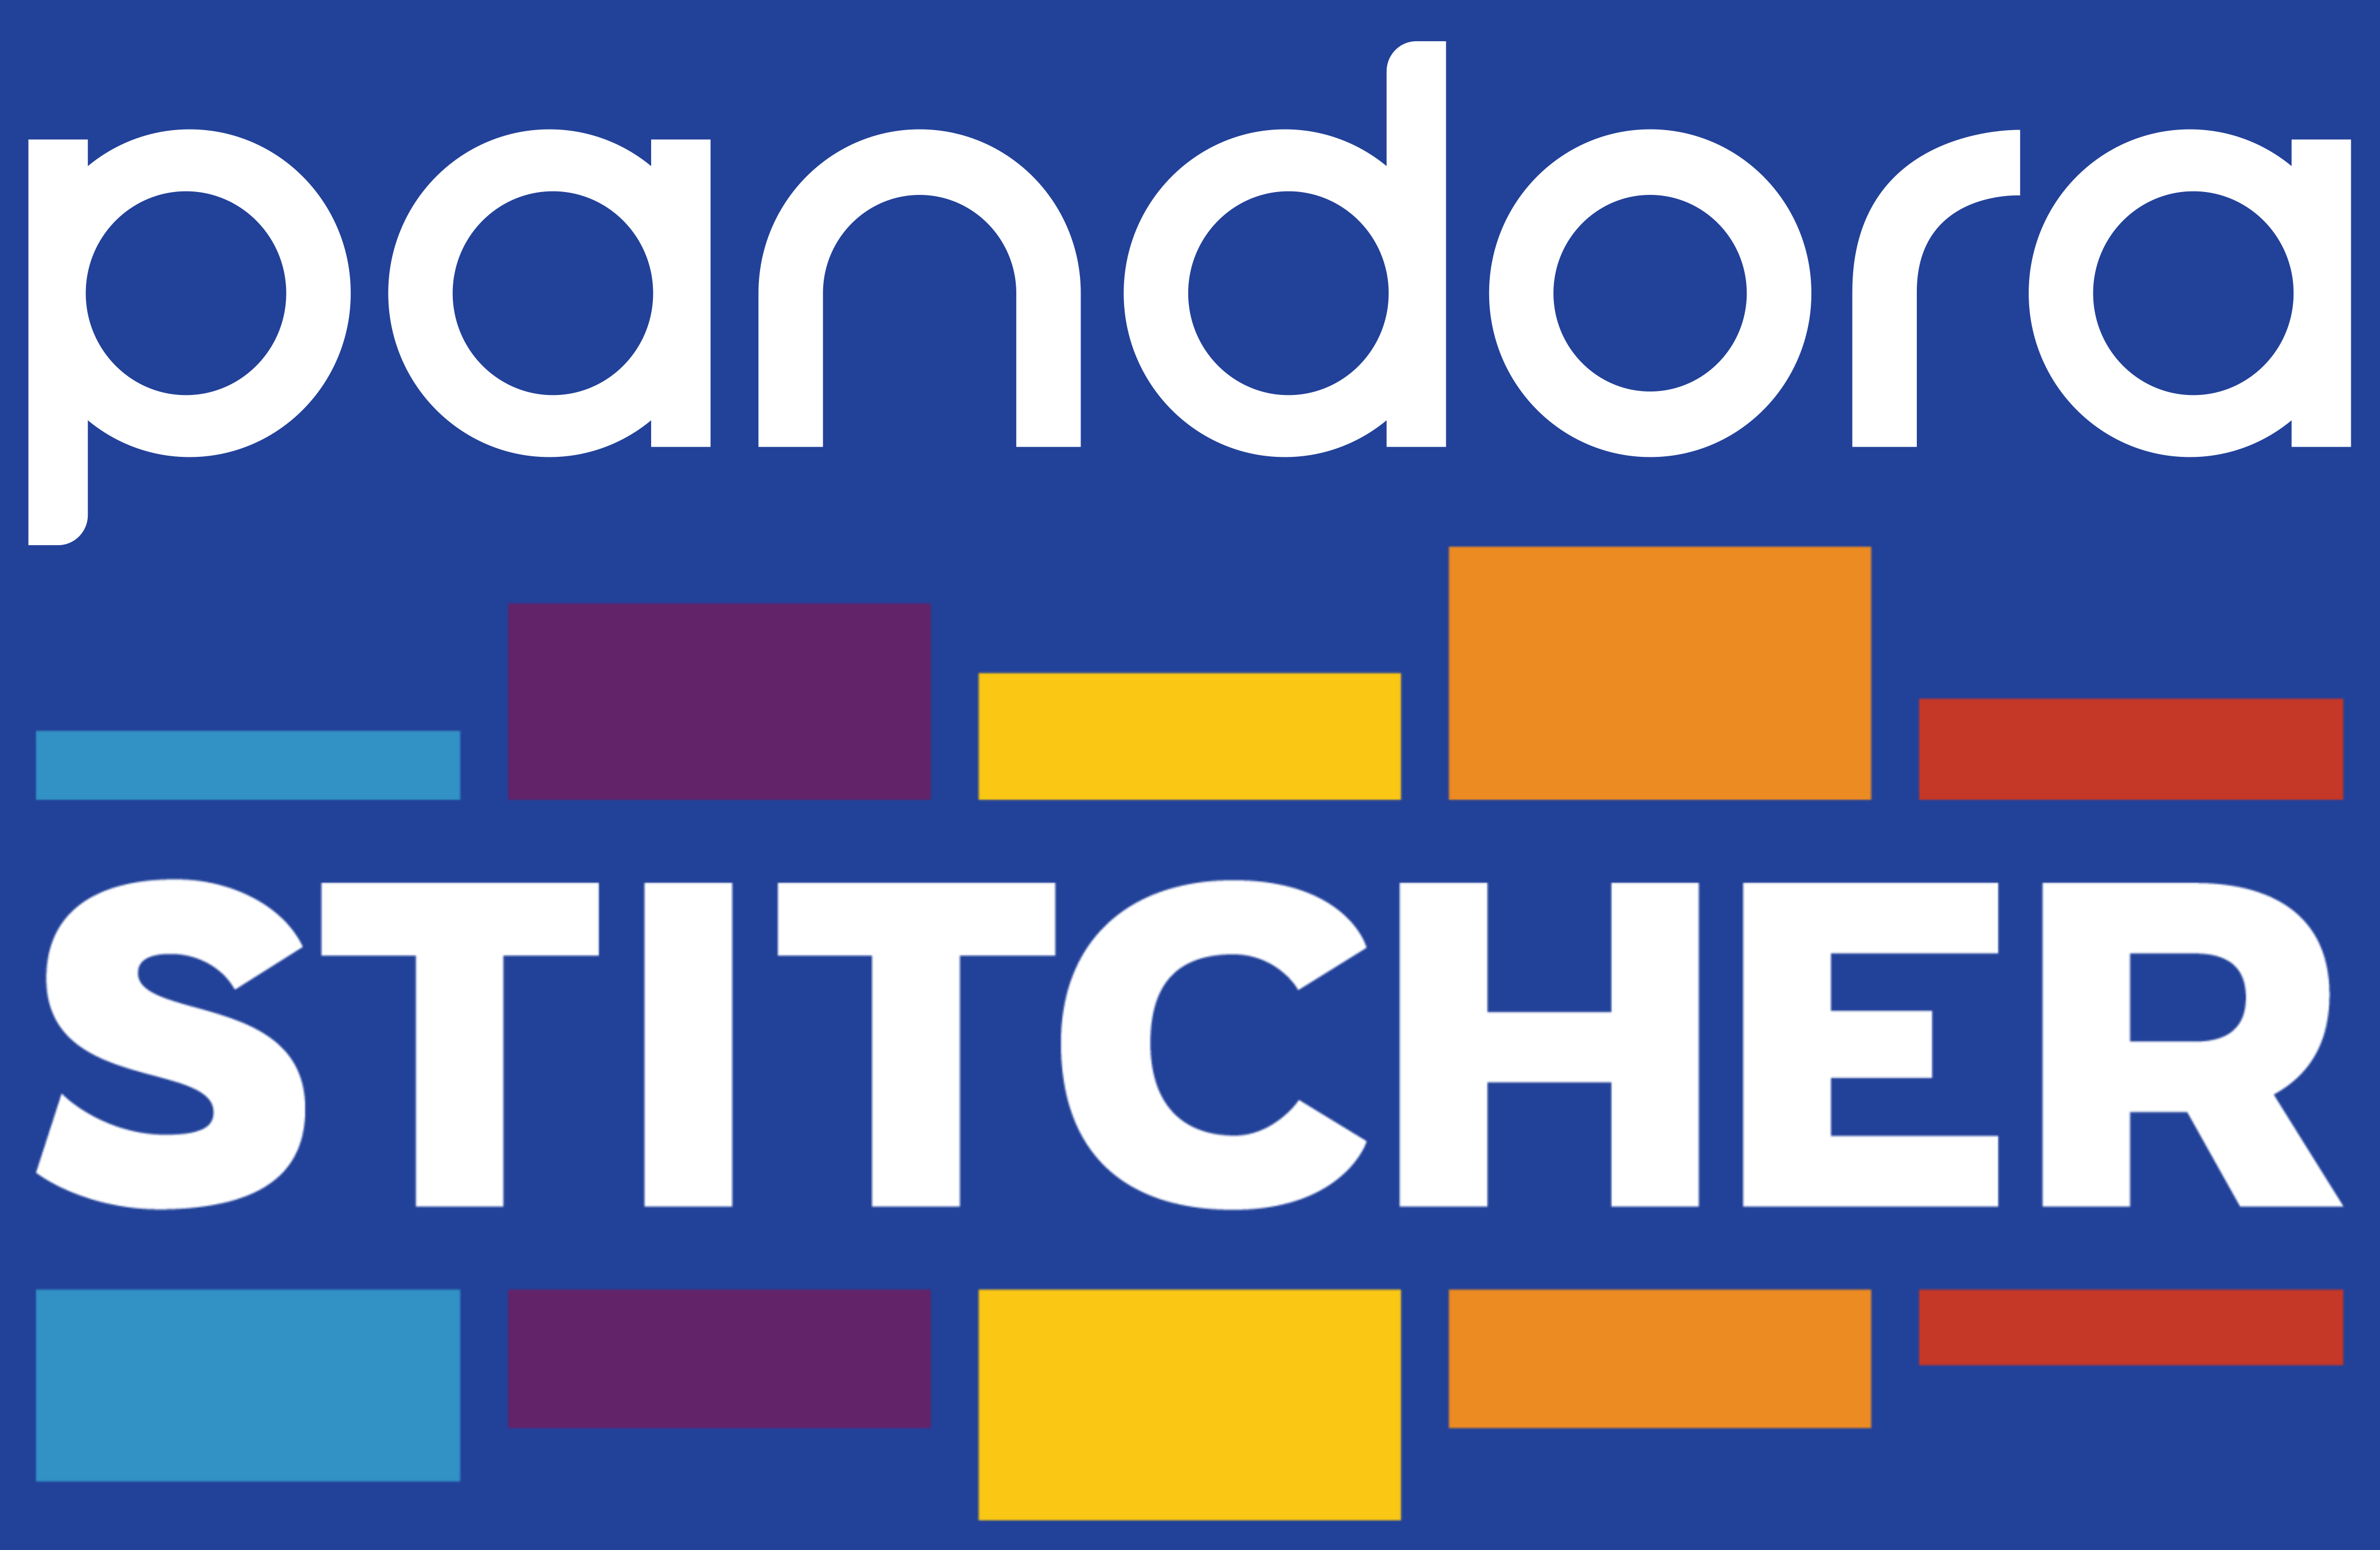 With the acquisition completed, Stitcher podcasts are now available on Pandora